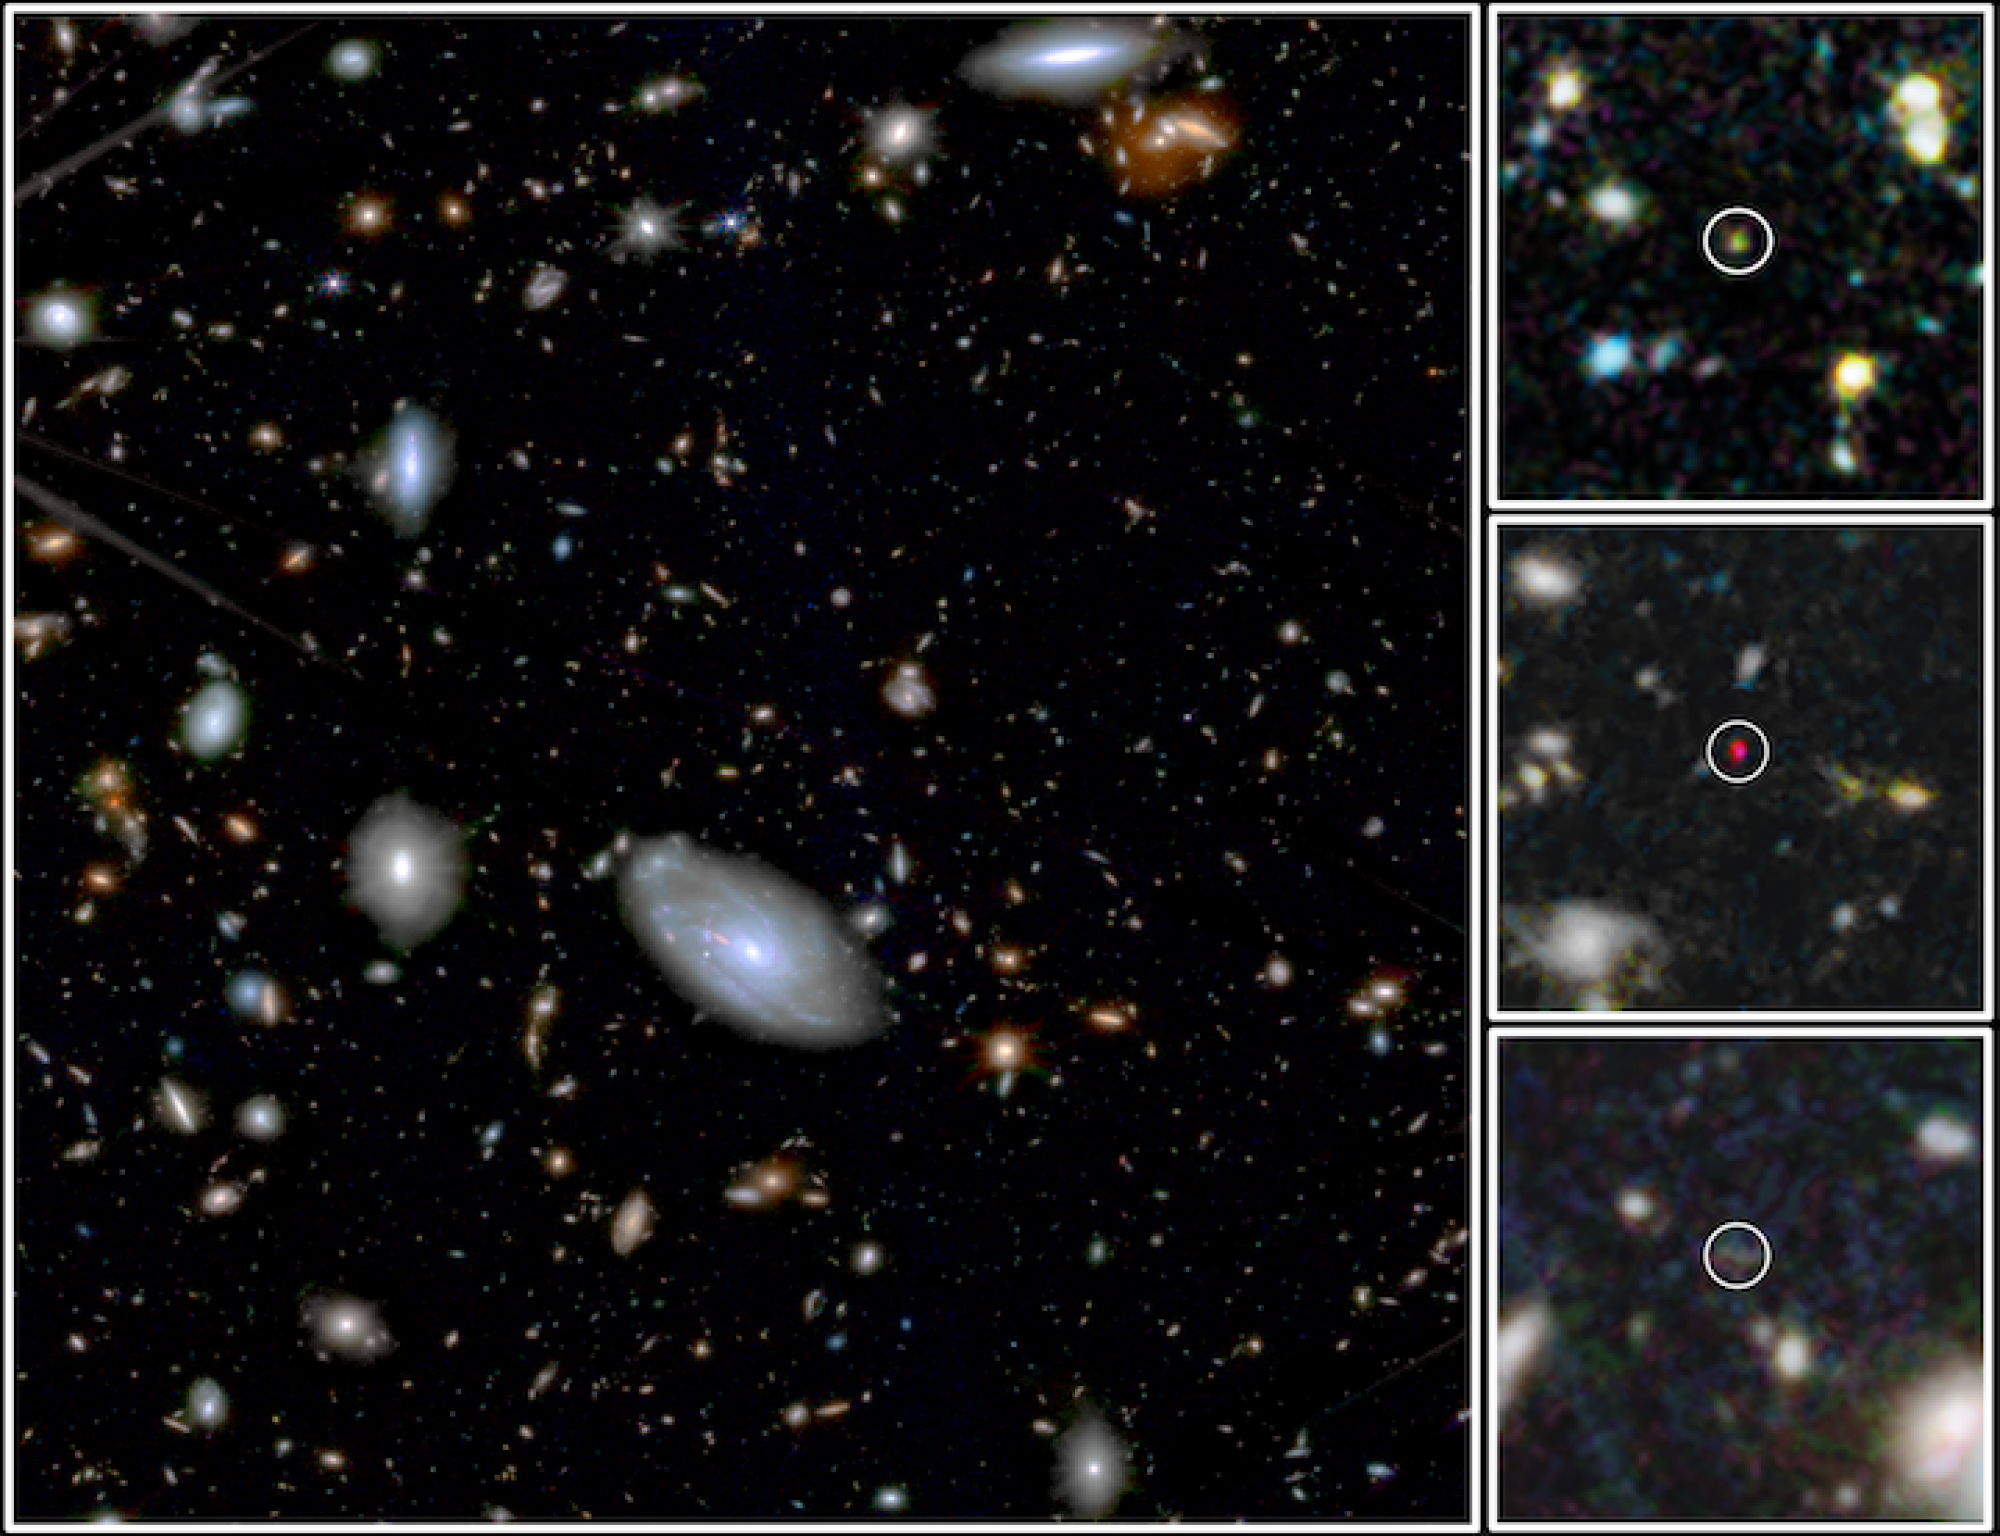 Ancient galaxies captured by the James Webb Space Telescope's MIRI Deep Imaging Survey.